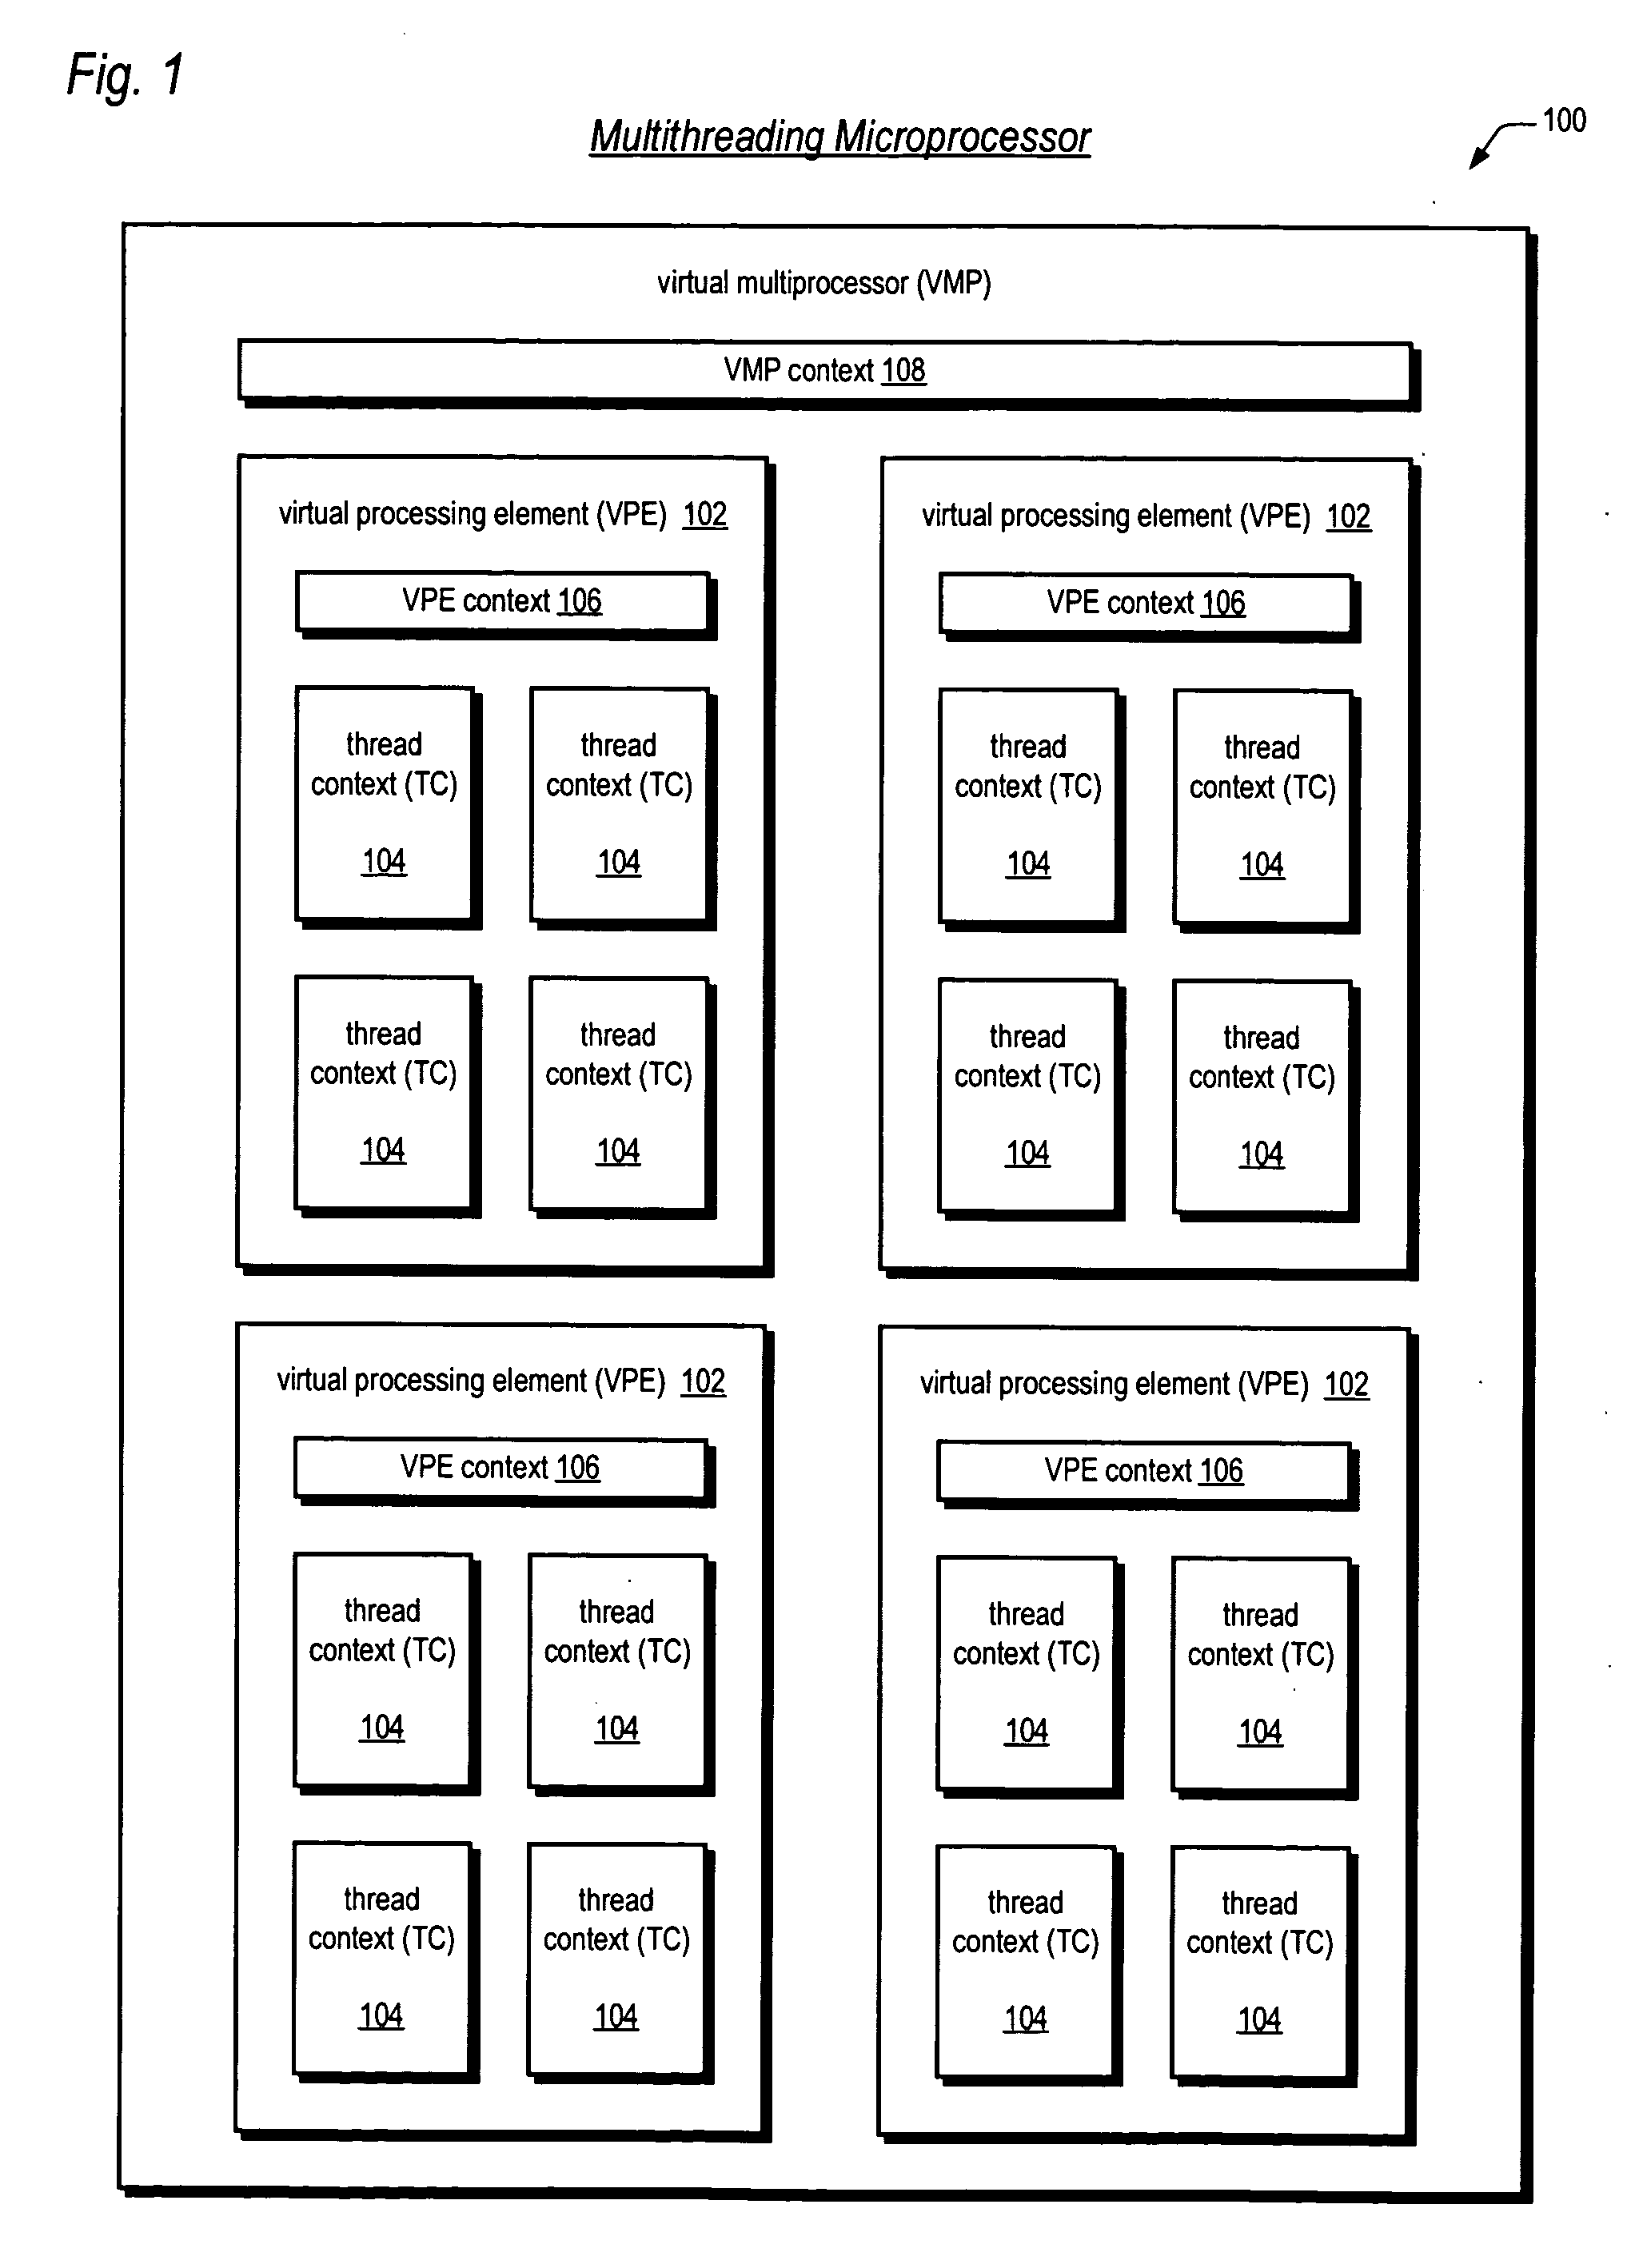 Apparatus, method, and instruction for software management of multiple computational contexts in a multithreaded microprocessor